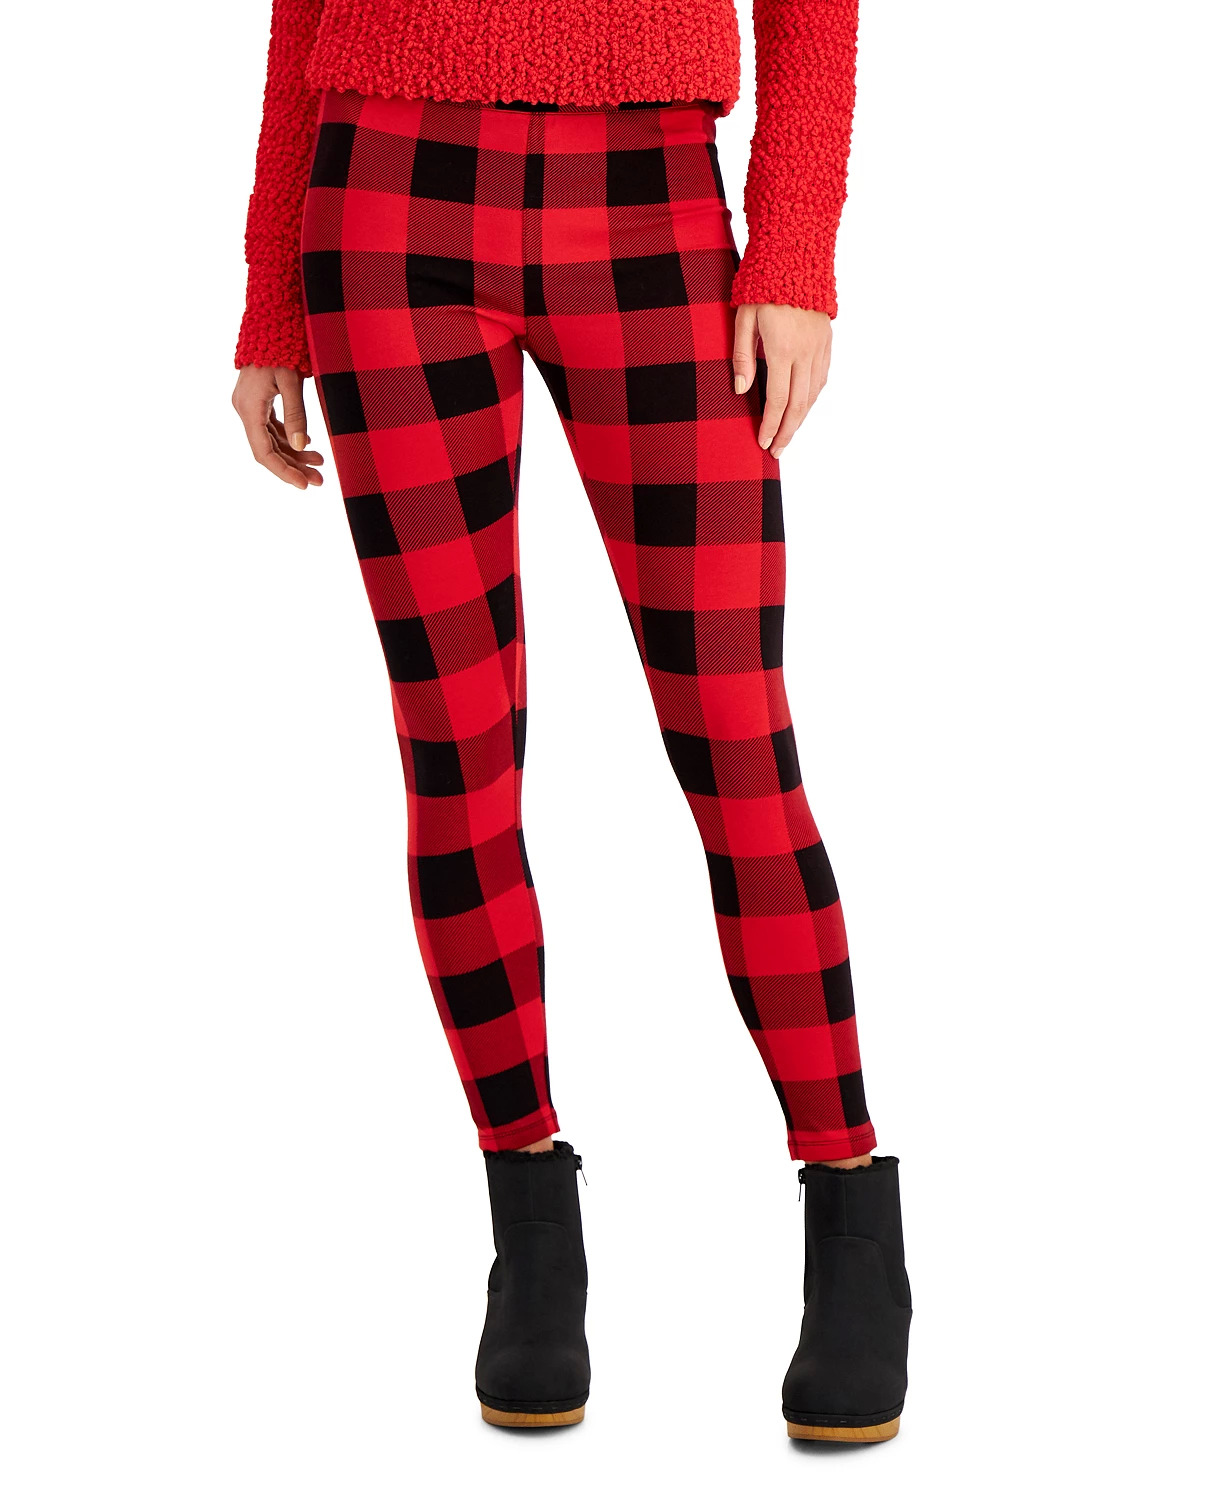 Style & Co Women's Leggings From $4.93, Calvin Klein Men's Circle Logo T-Shirt (XL, 2XL) $4.95 & More + SD Cashback + Free Store Pickup at Macy's or FS on $25+